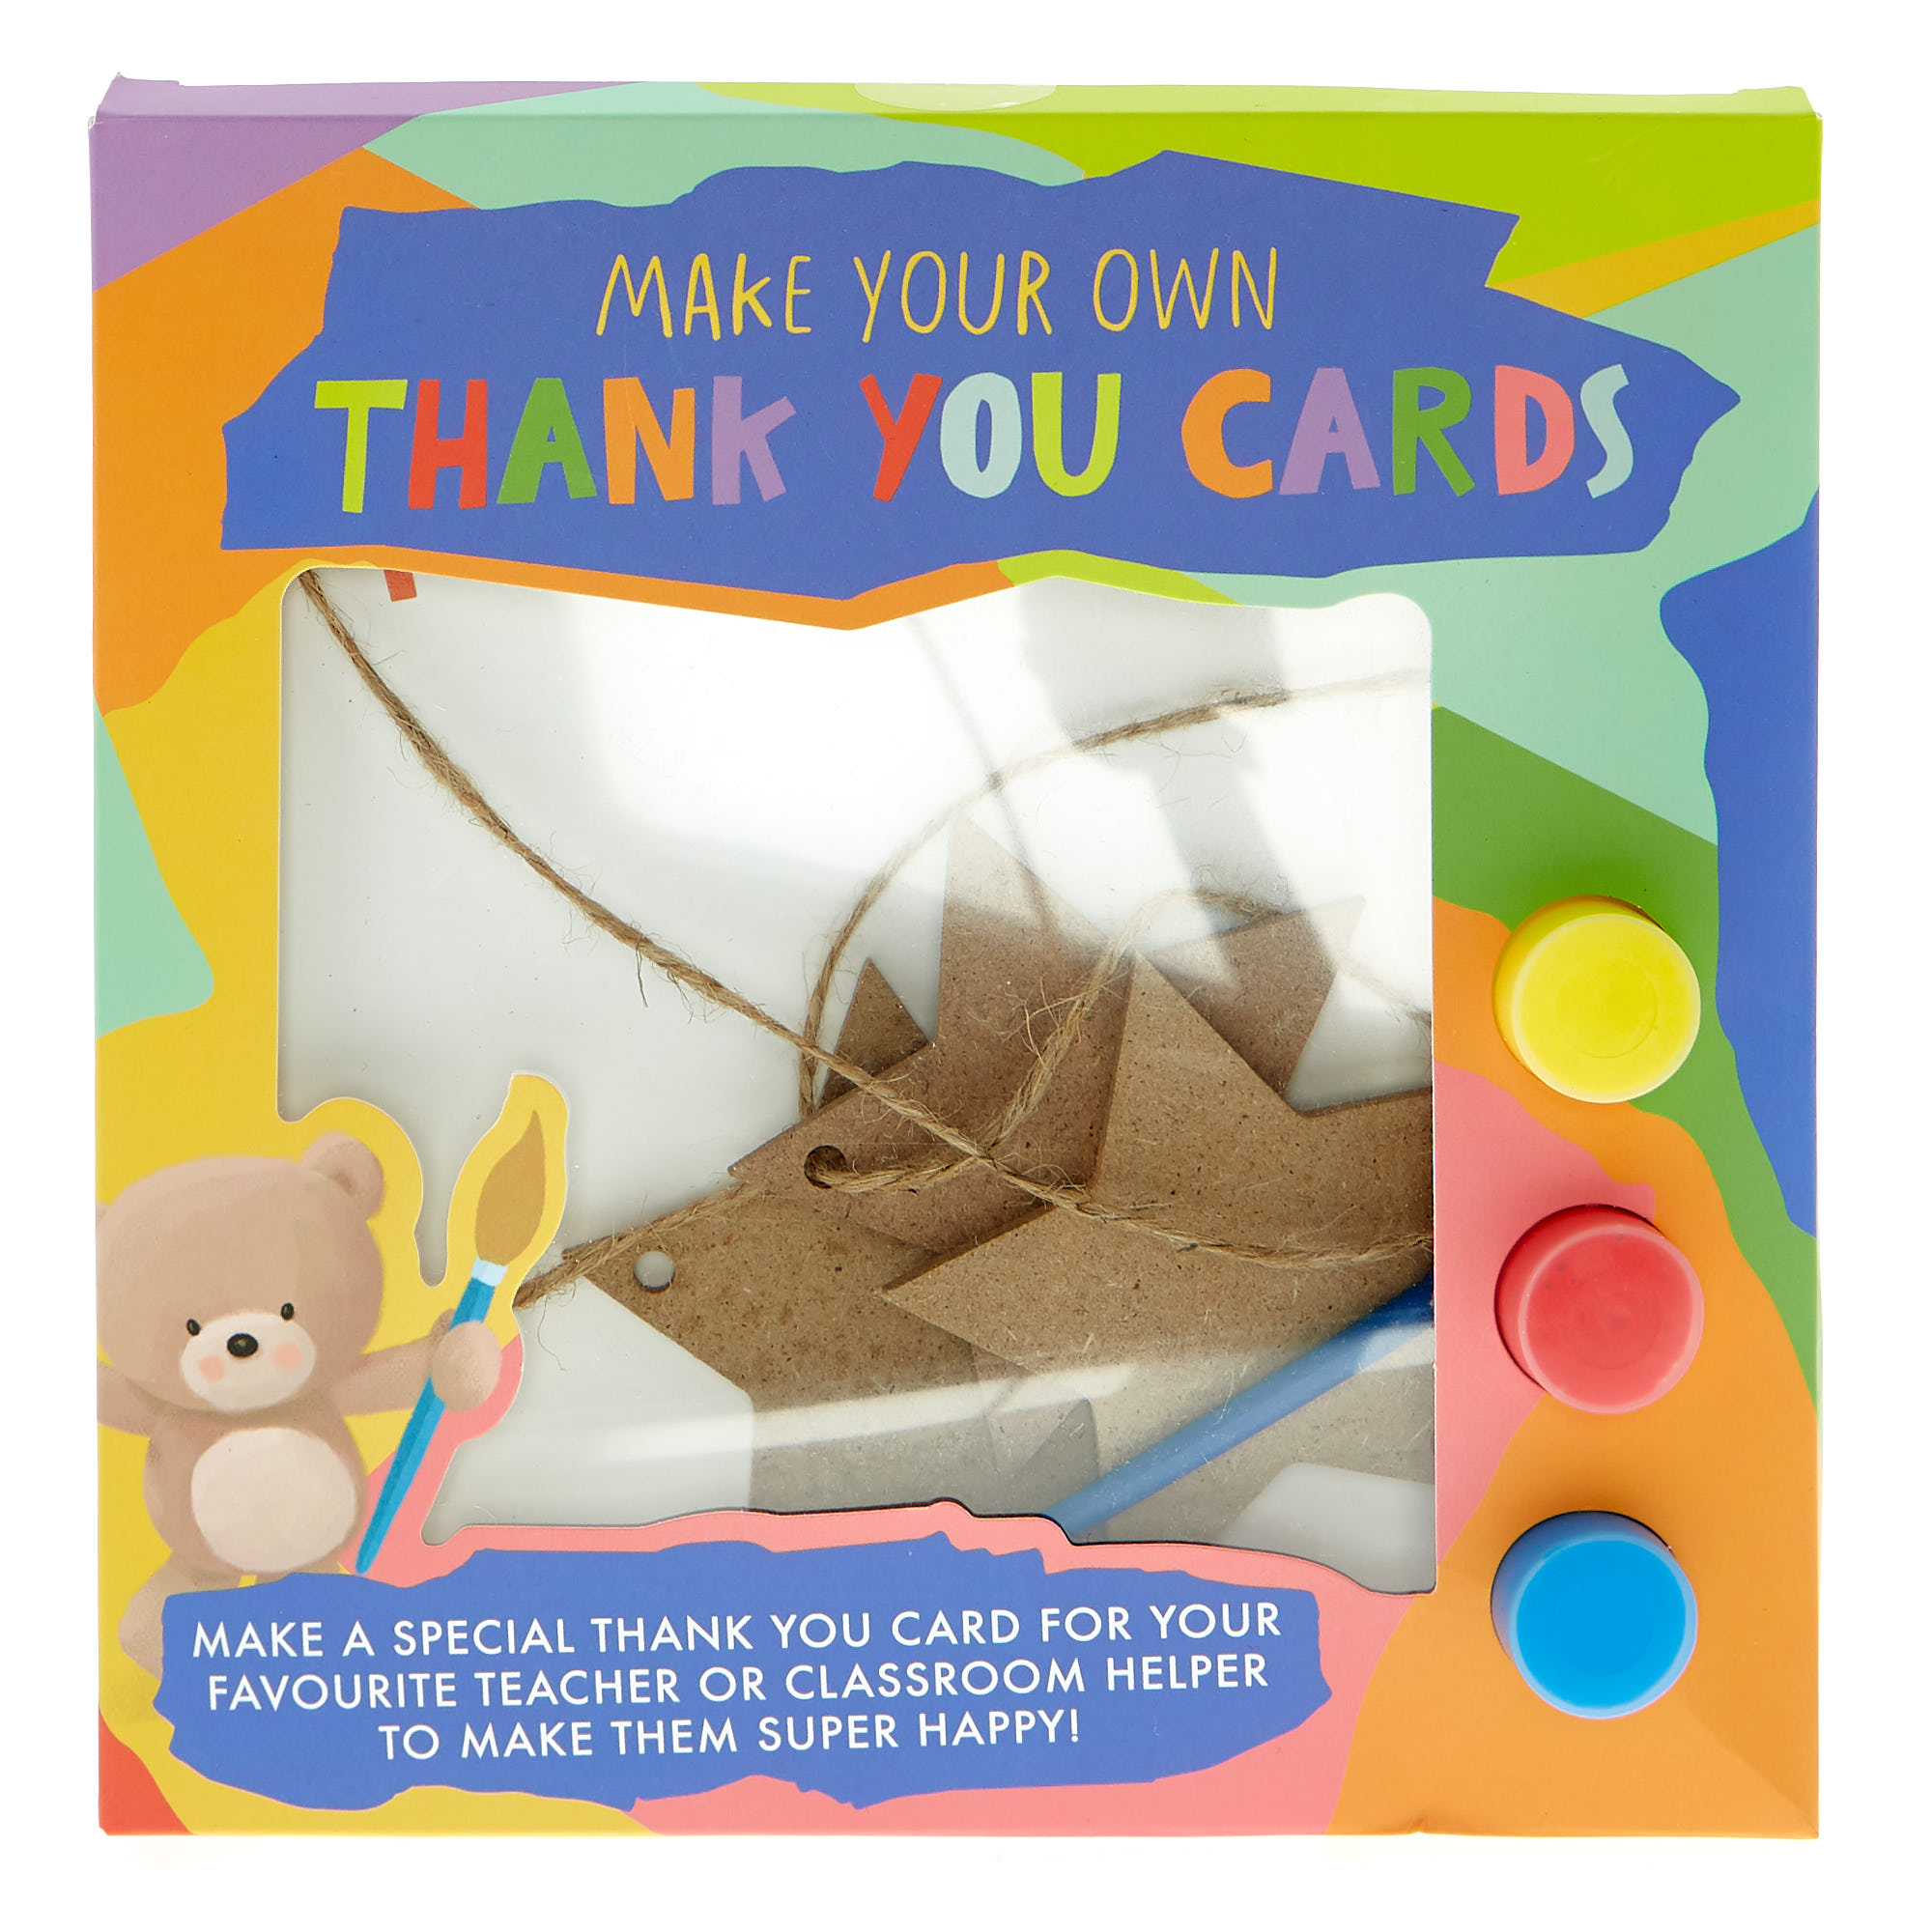 buy-make-your-own-thank-you-cards-set-of-3-for-gbp-1-49-card-factory-uk